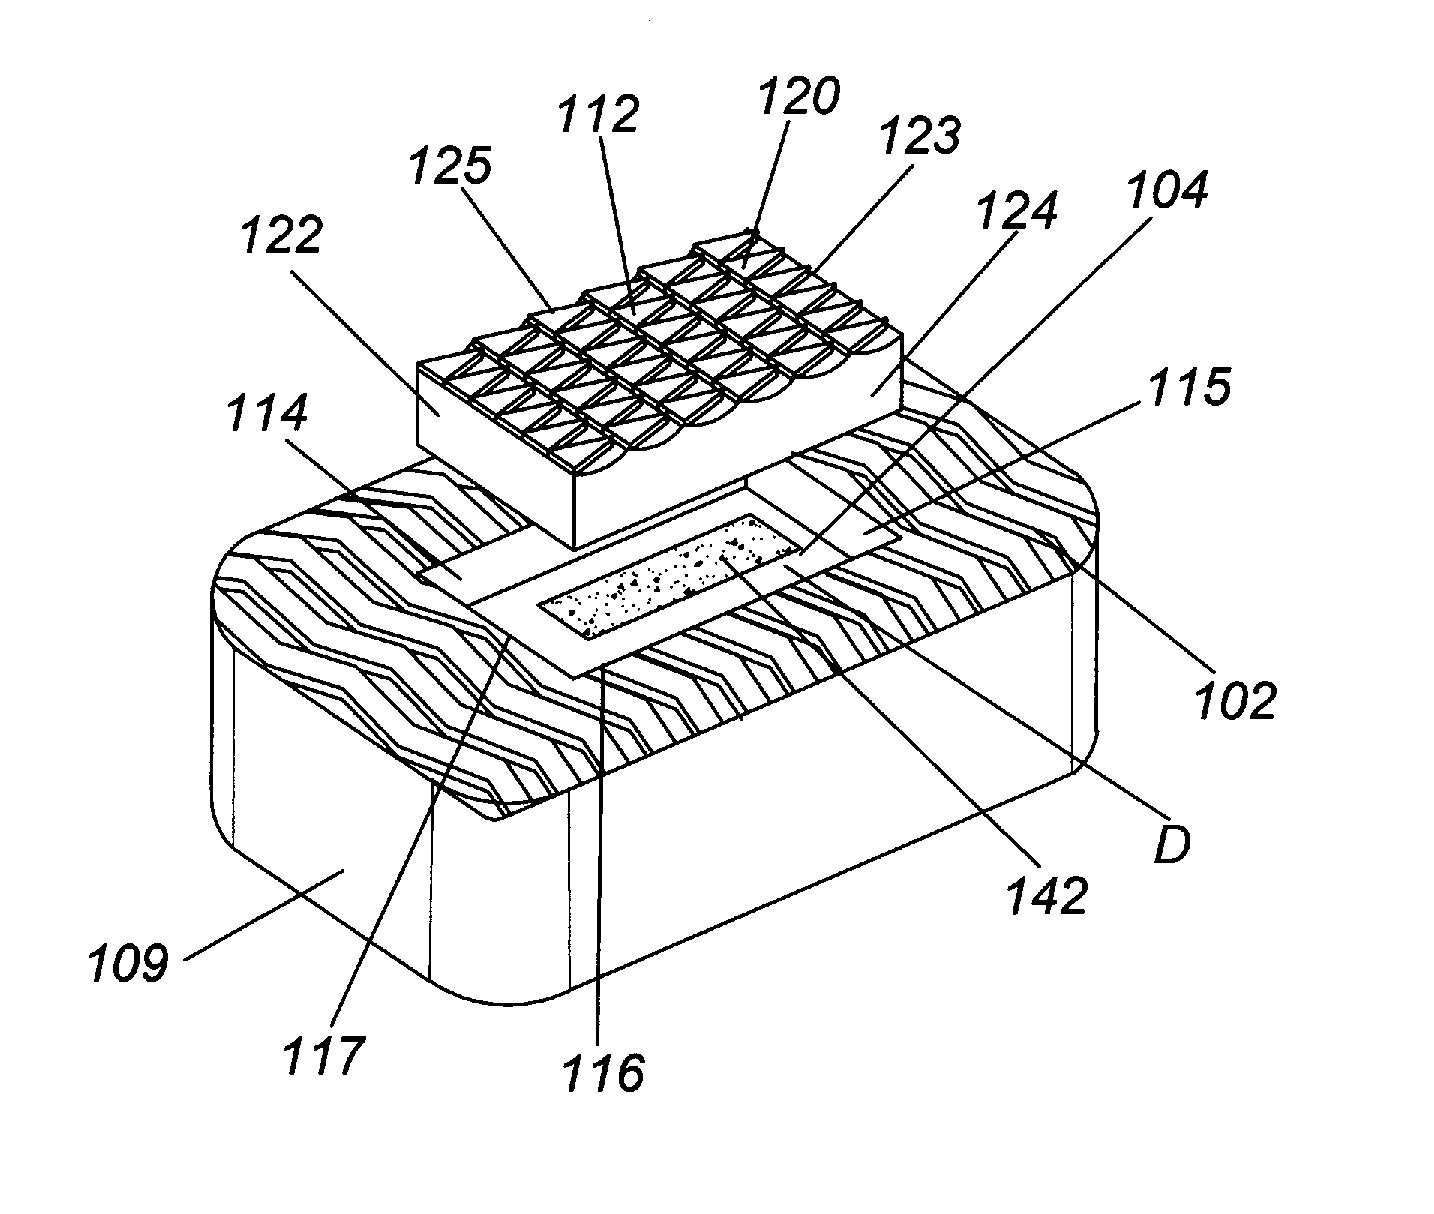 Cleaning implement having insertable member